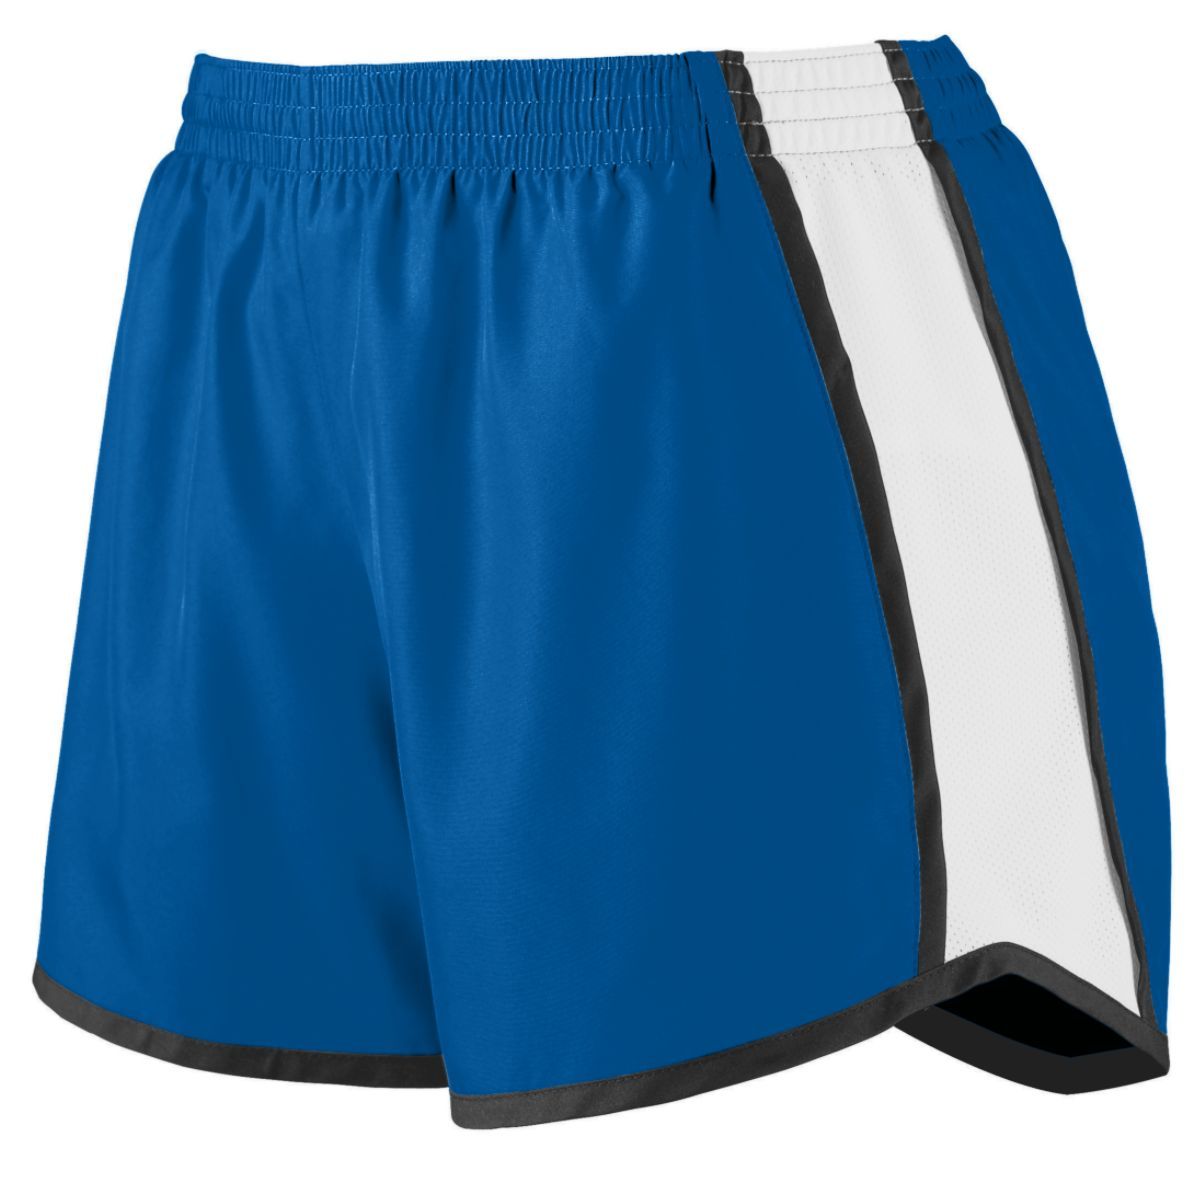 Augusta Sportswear Ladies Pulse Shorts in Royal/White/Black  -Part of the Ladies, Ladies-Shorts, Augusta-Products, Volleyball product lines at KanaleyCreations.com